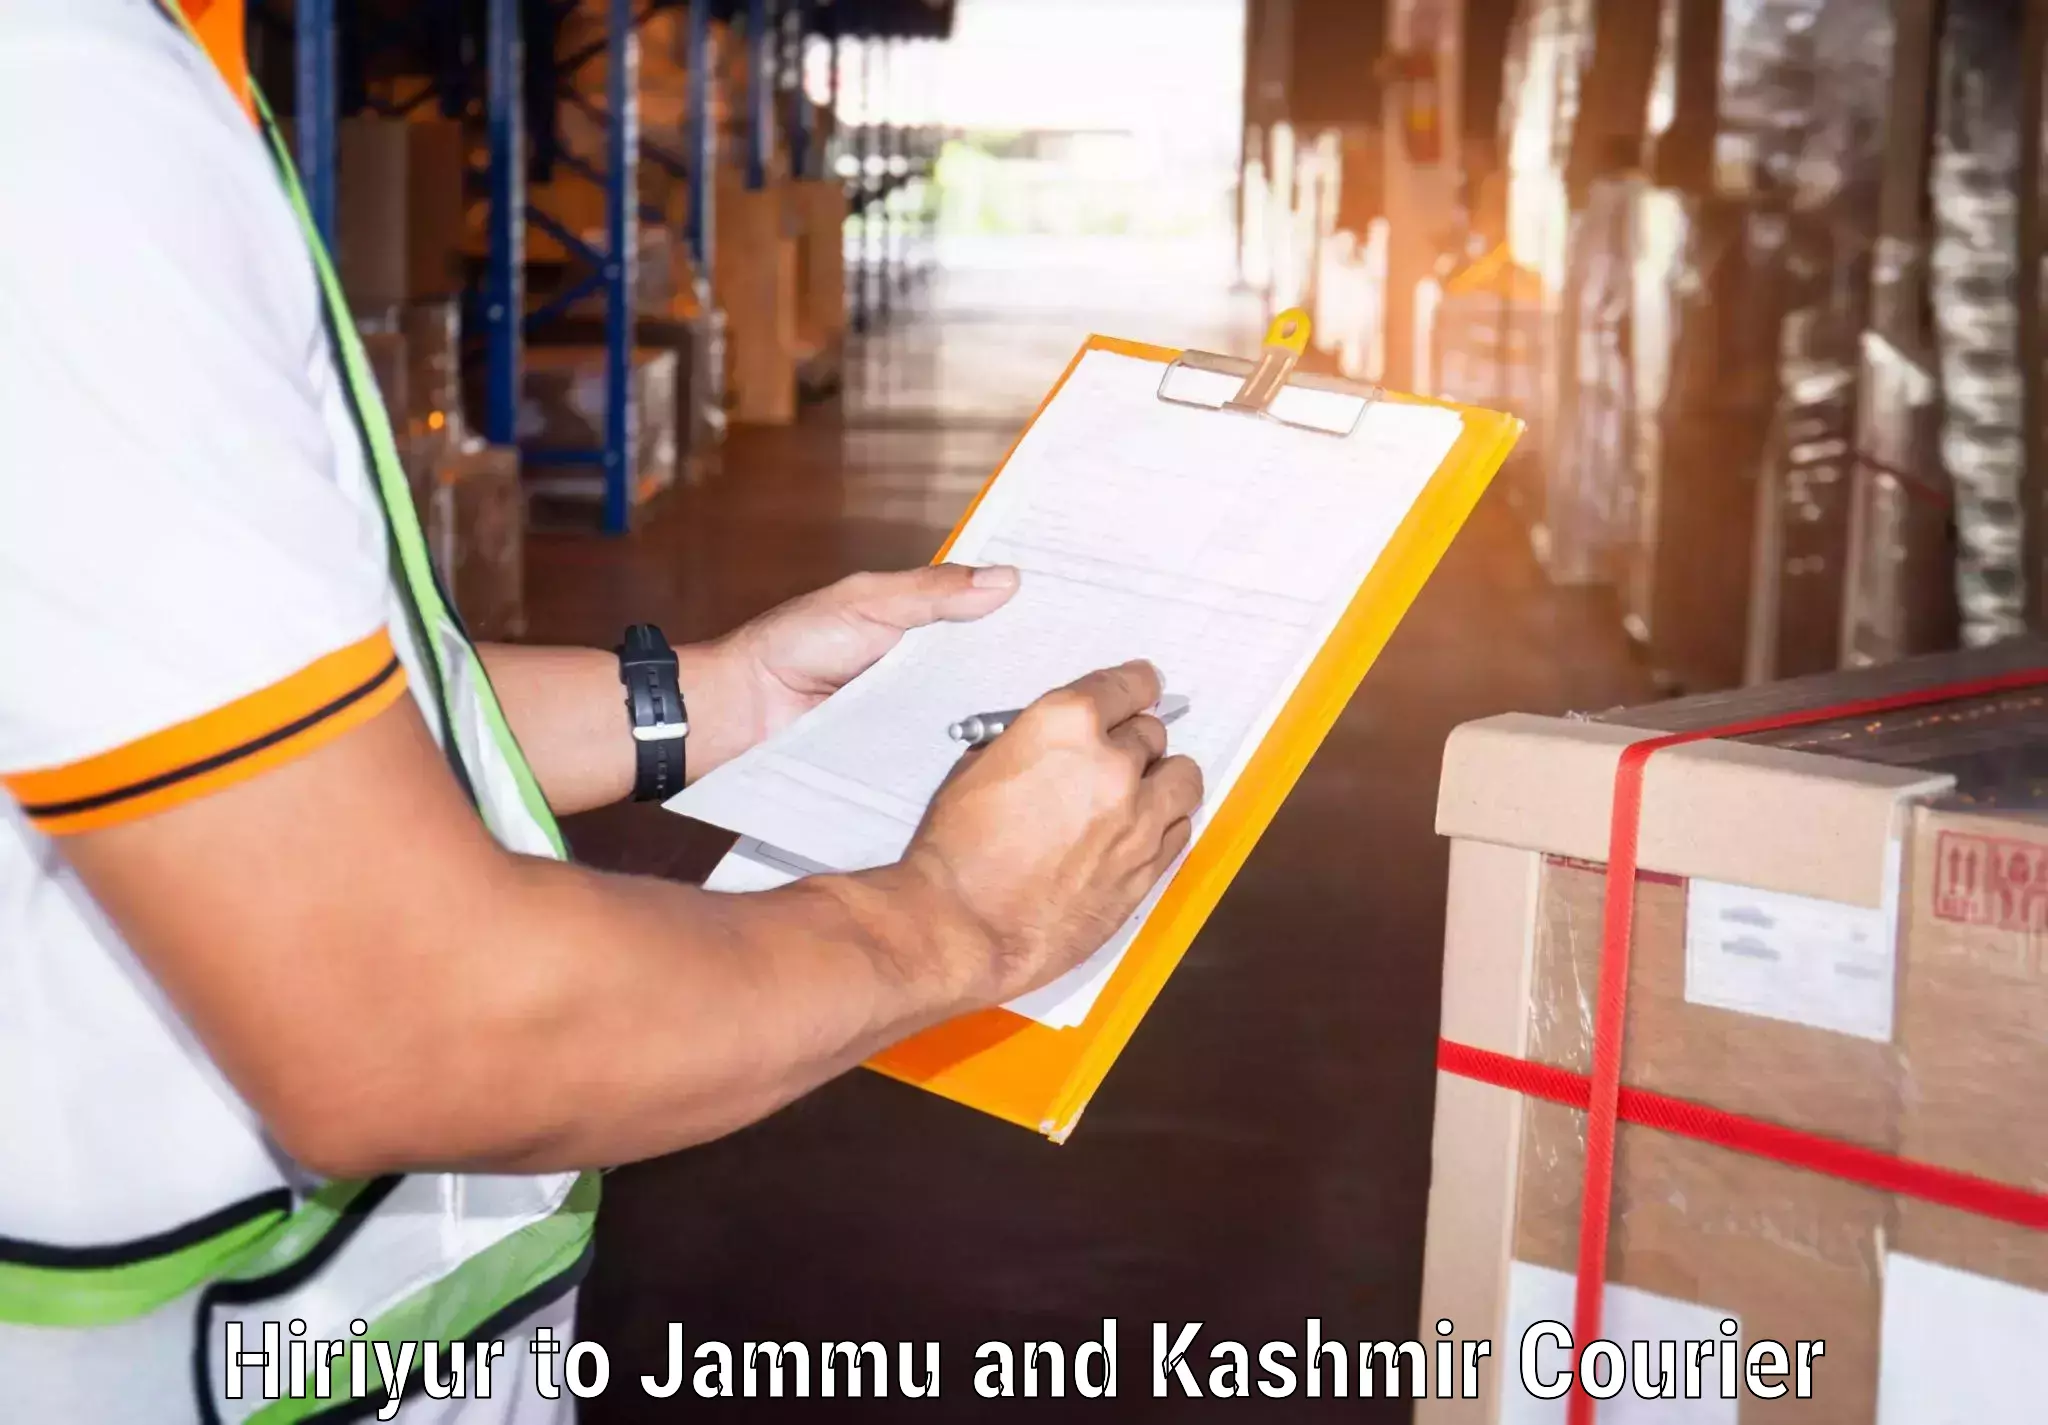 Express delivery network Hiriyur to Jammu and Kashmir